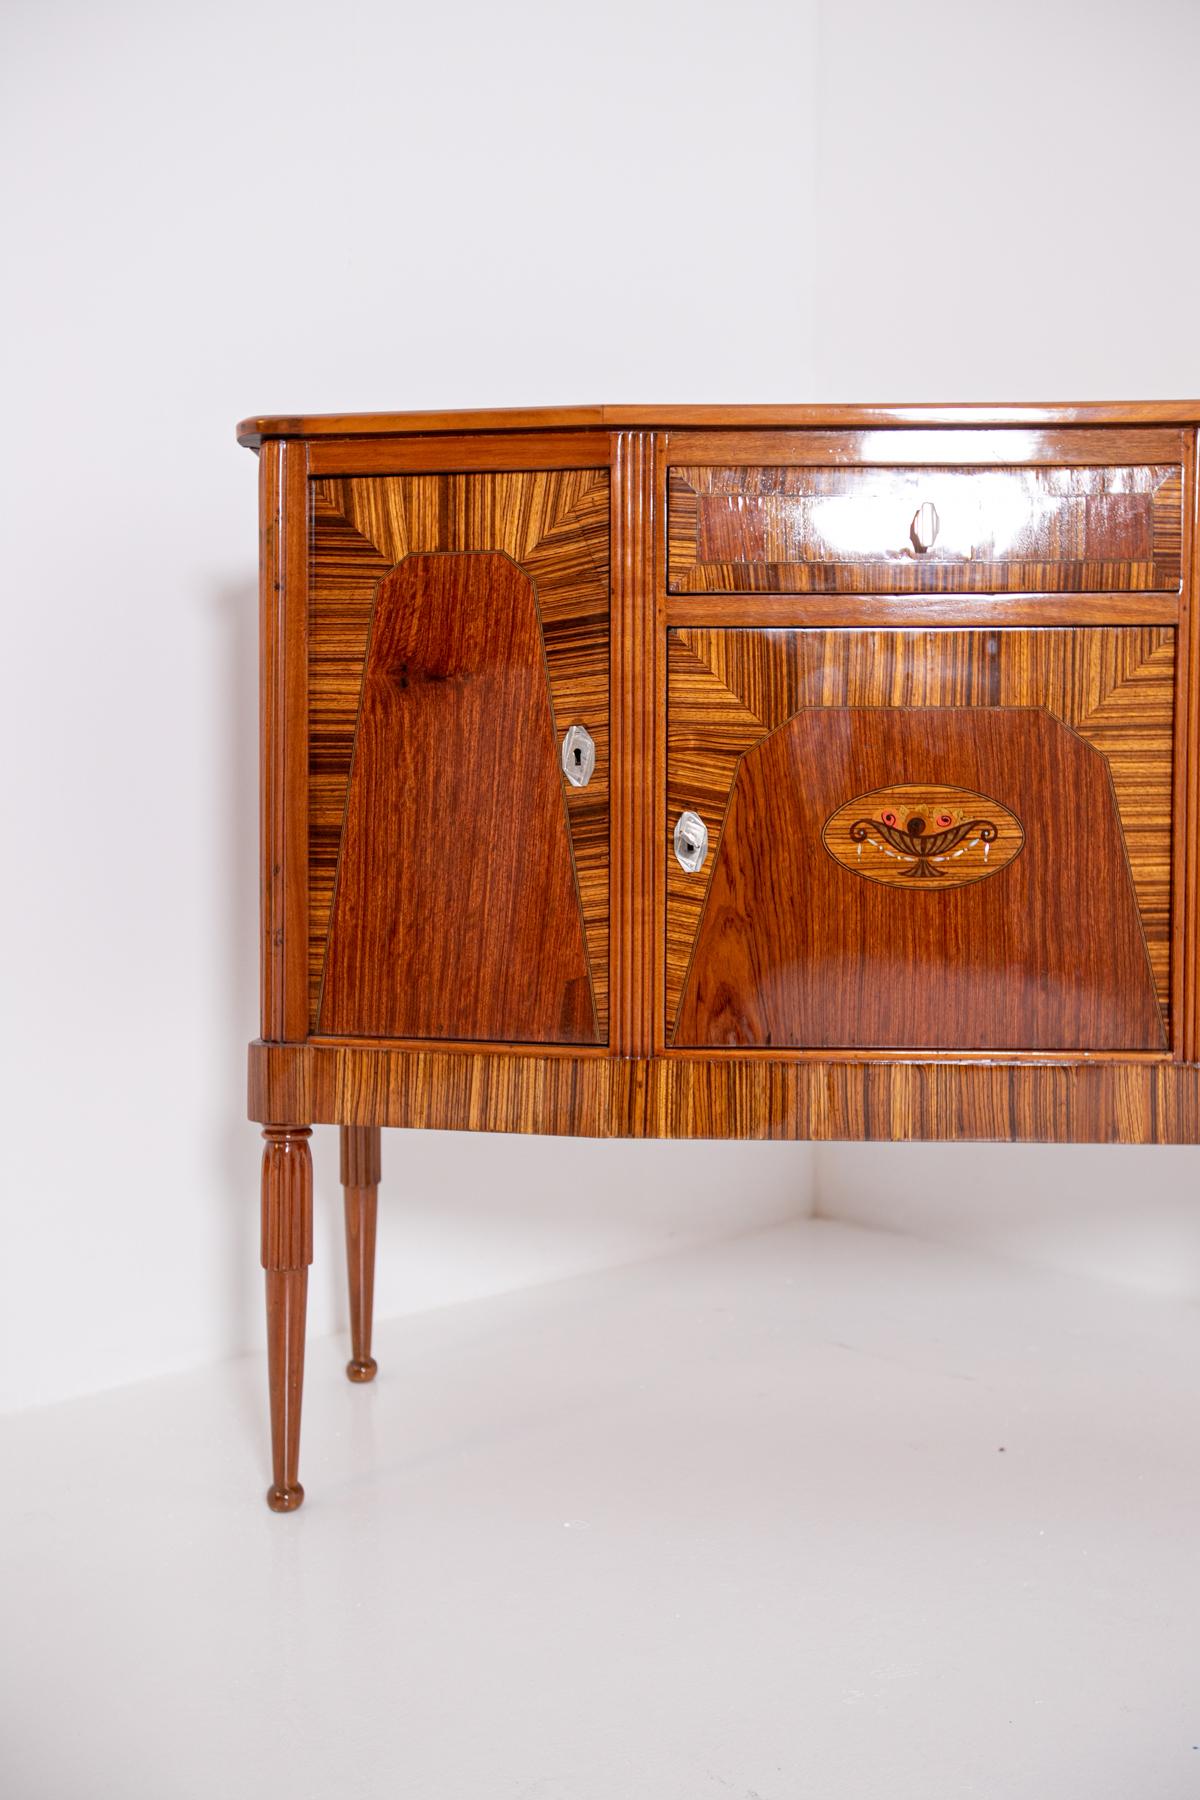 Refined French sideboard from the 1930s. The sideboard is made of different types of wood.
The particularity of the sideboard is its great mastery of woodwork. It has three hinged doors with a pull-out drawer under the shelf. Its doors can be